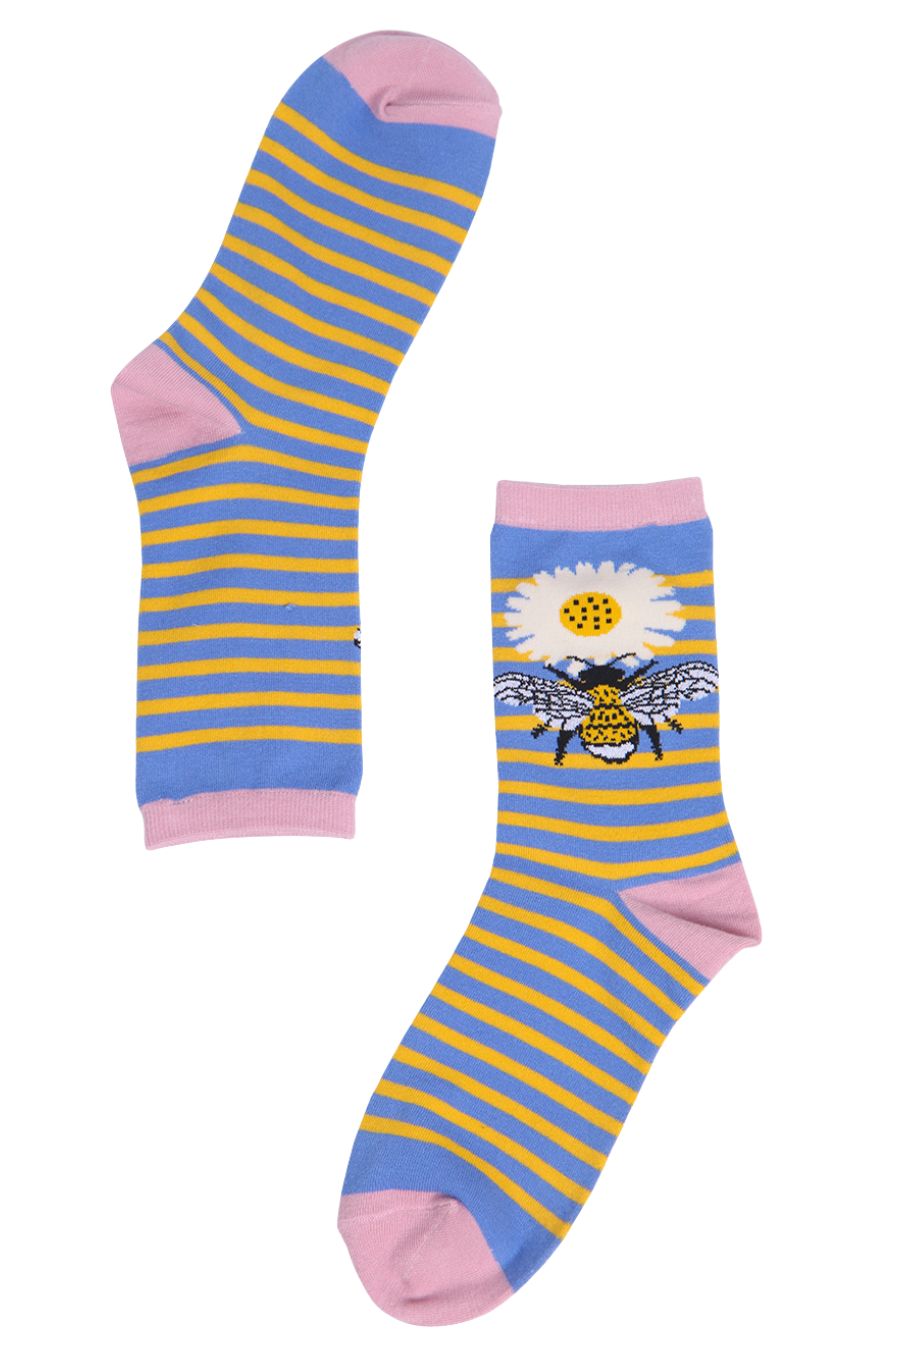 blue, yellow striped bamboo socks with bumblebee and daisy